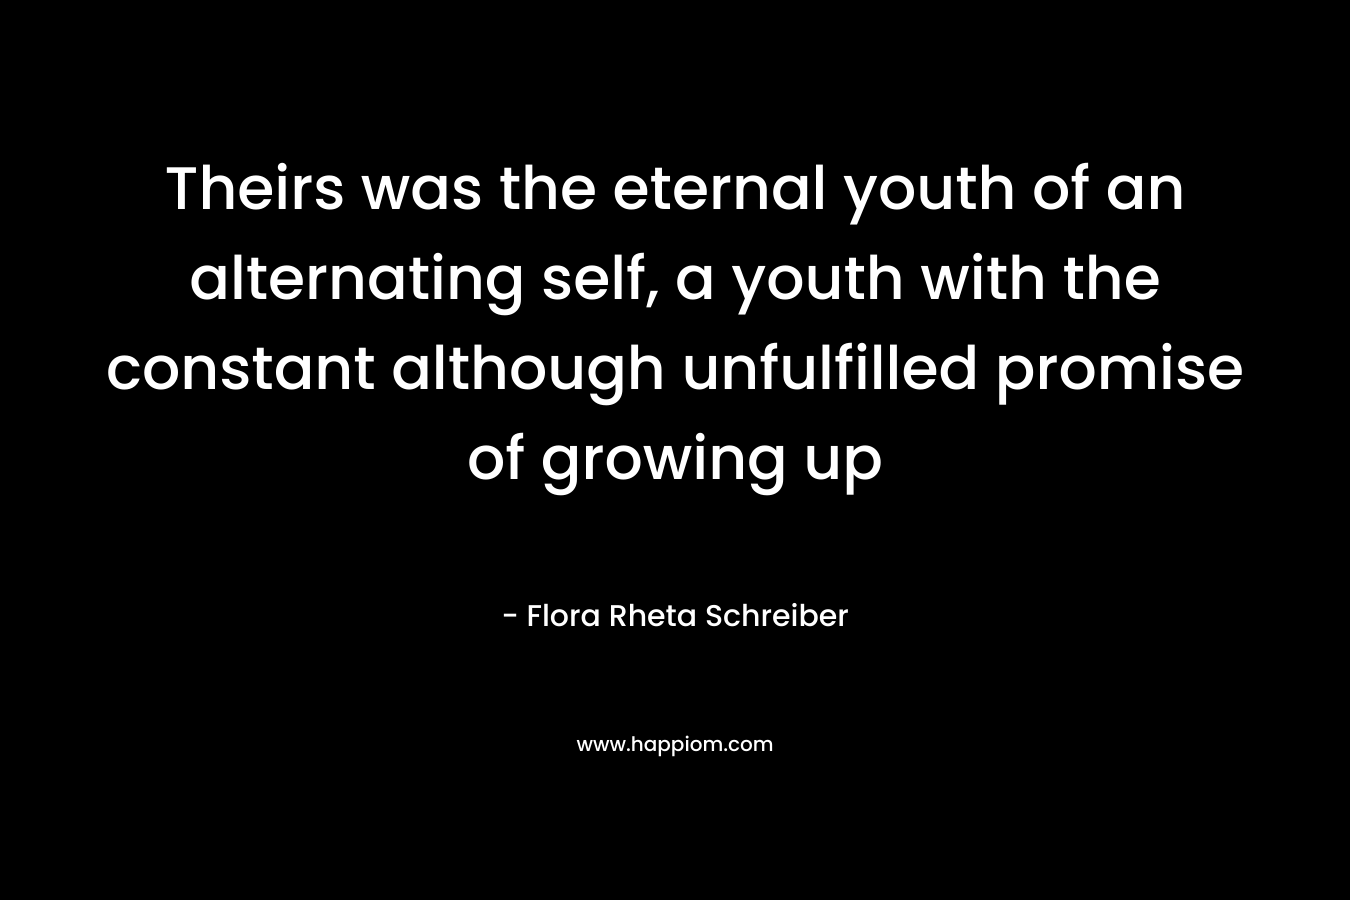 Theirs was the eternal youth of an alternating self, a youth with the constant although unfulfilled promise of growing up